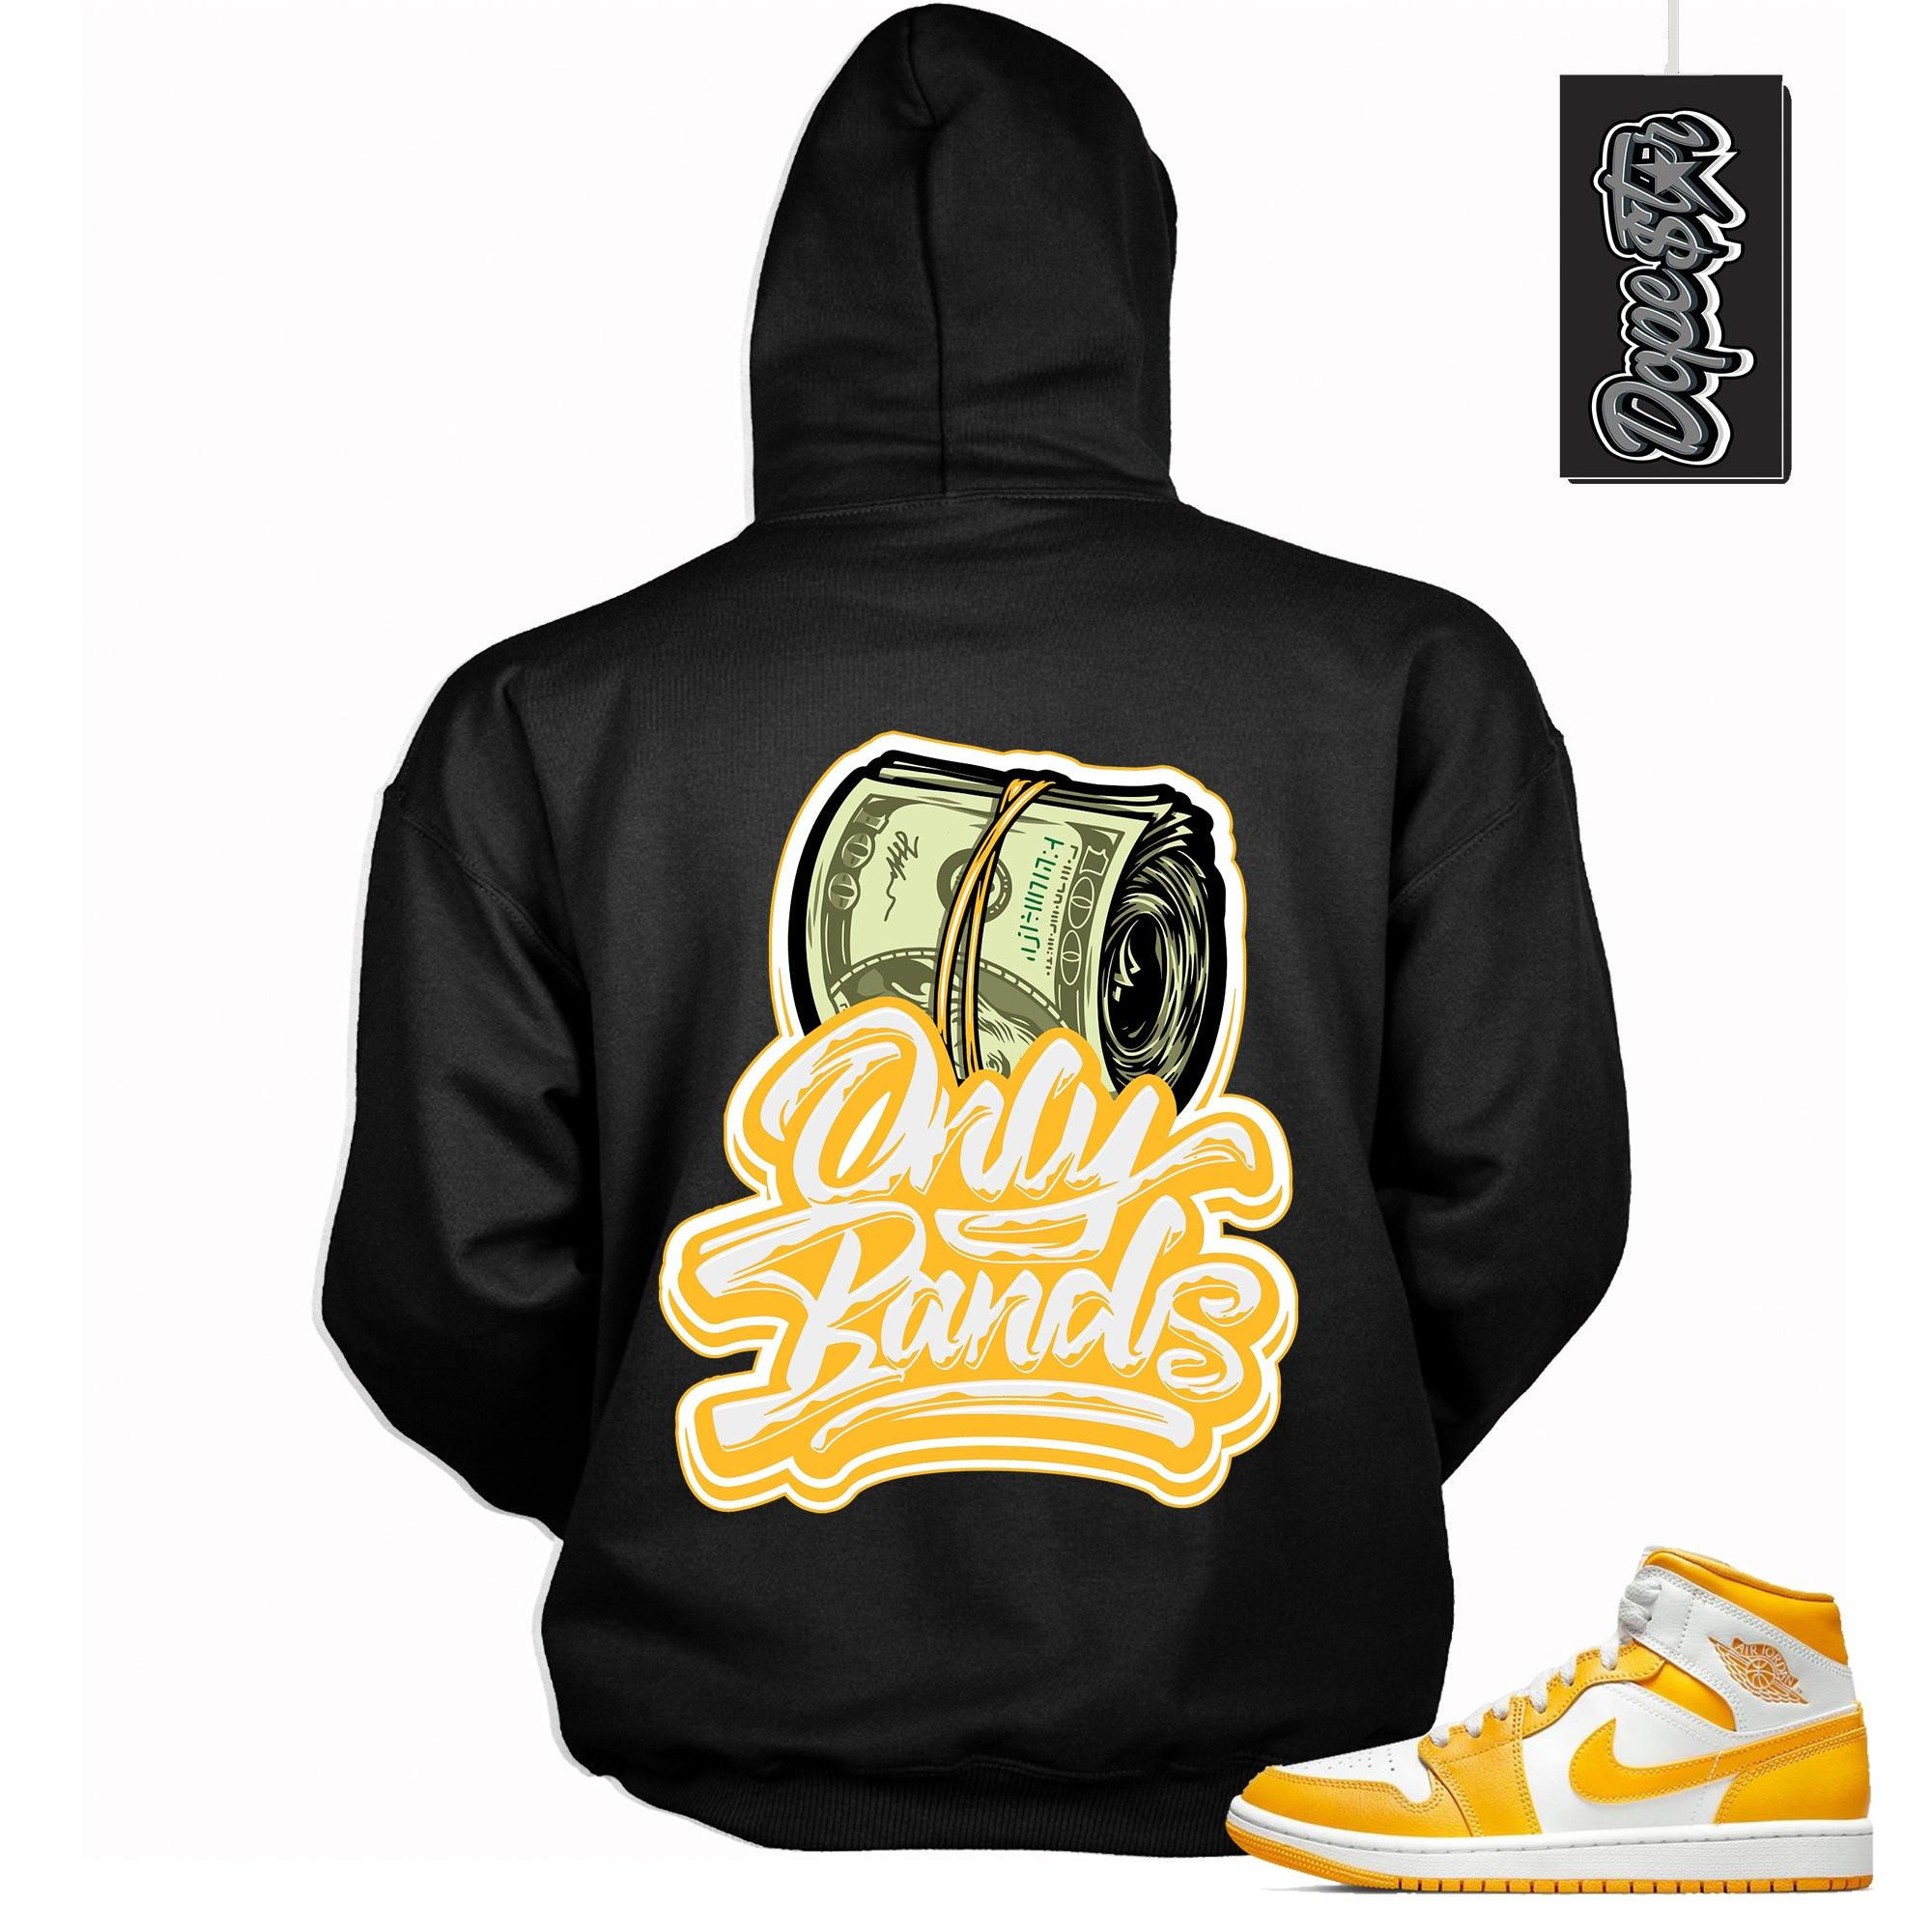 Only Bands Hooded Sweatshirt AJ 1 Mid White University Gold photo